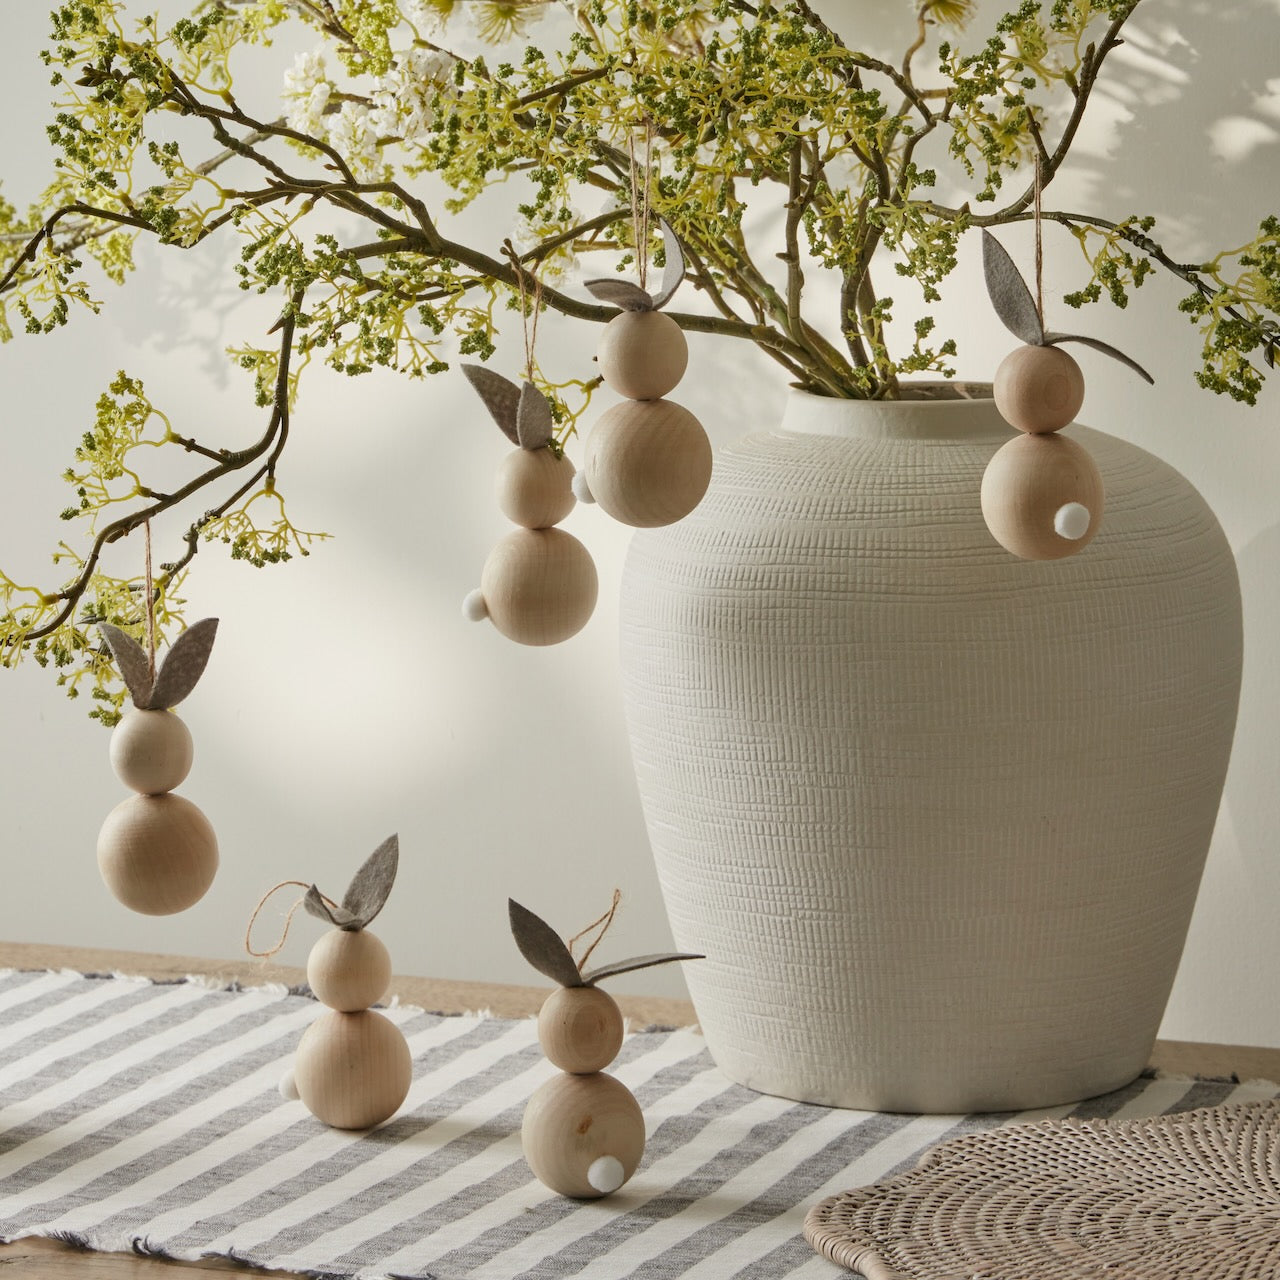 Set of 6 Wooden Easter Bunny Decorations